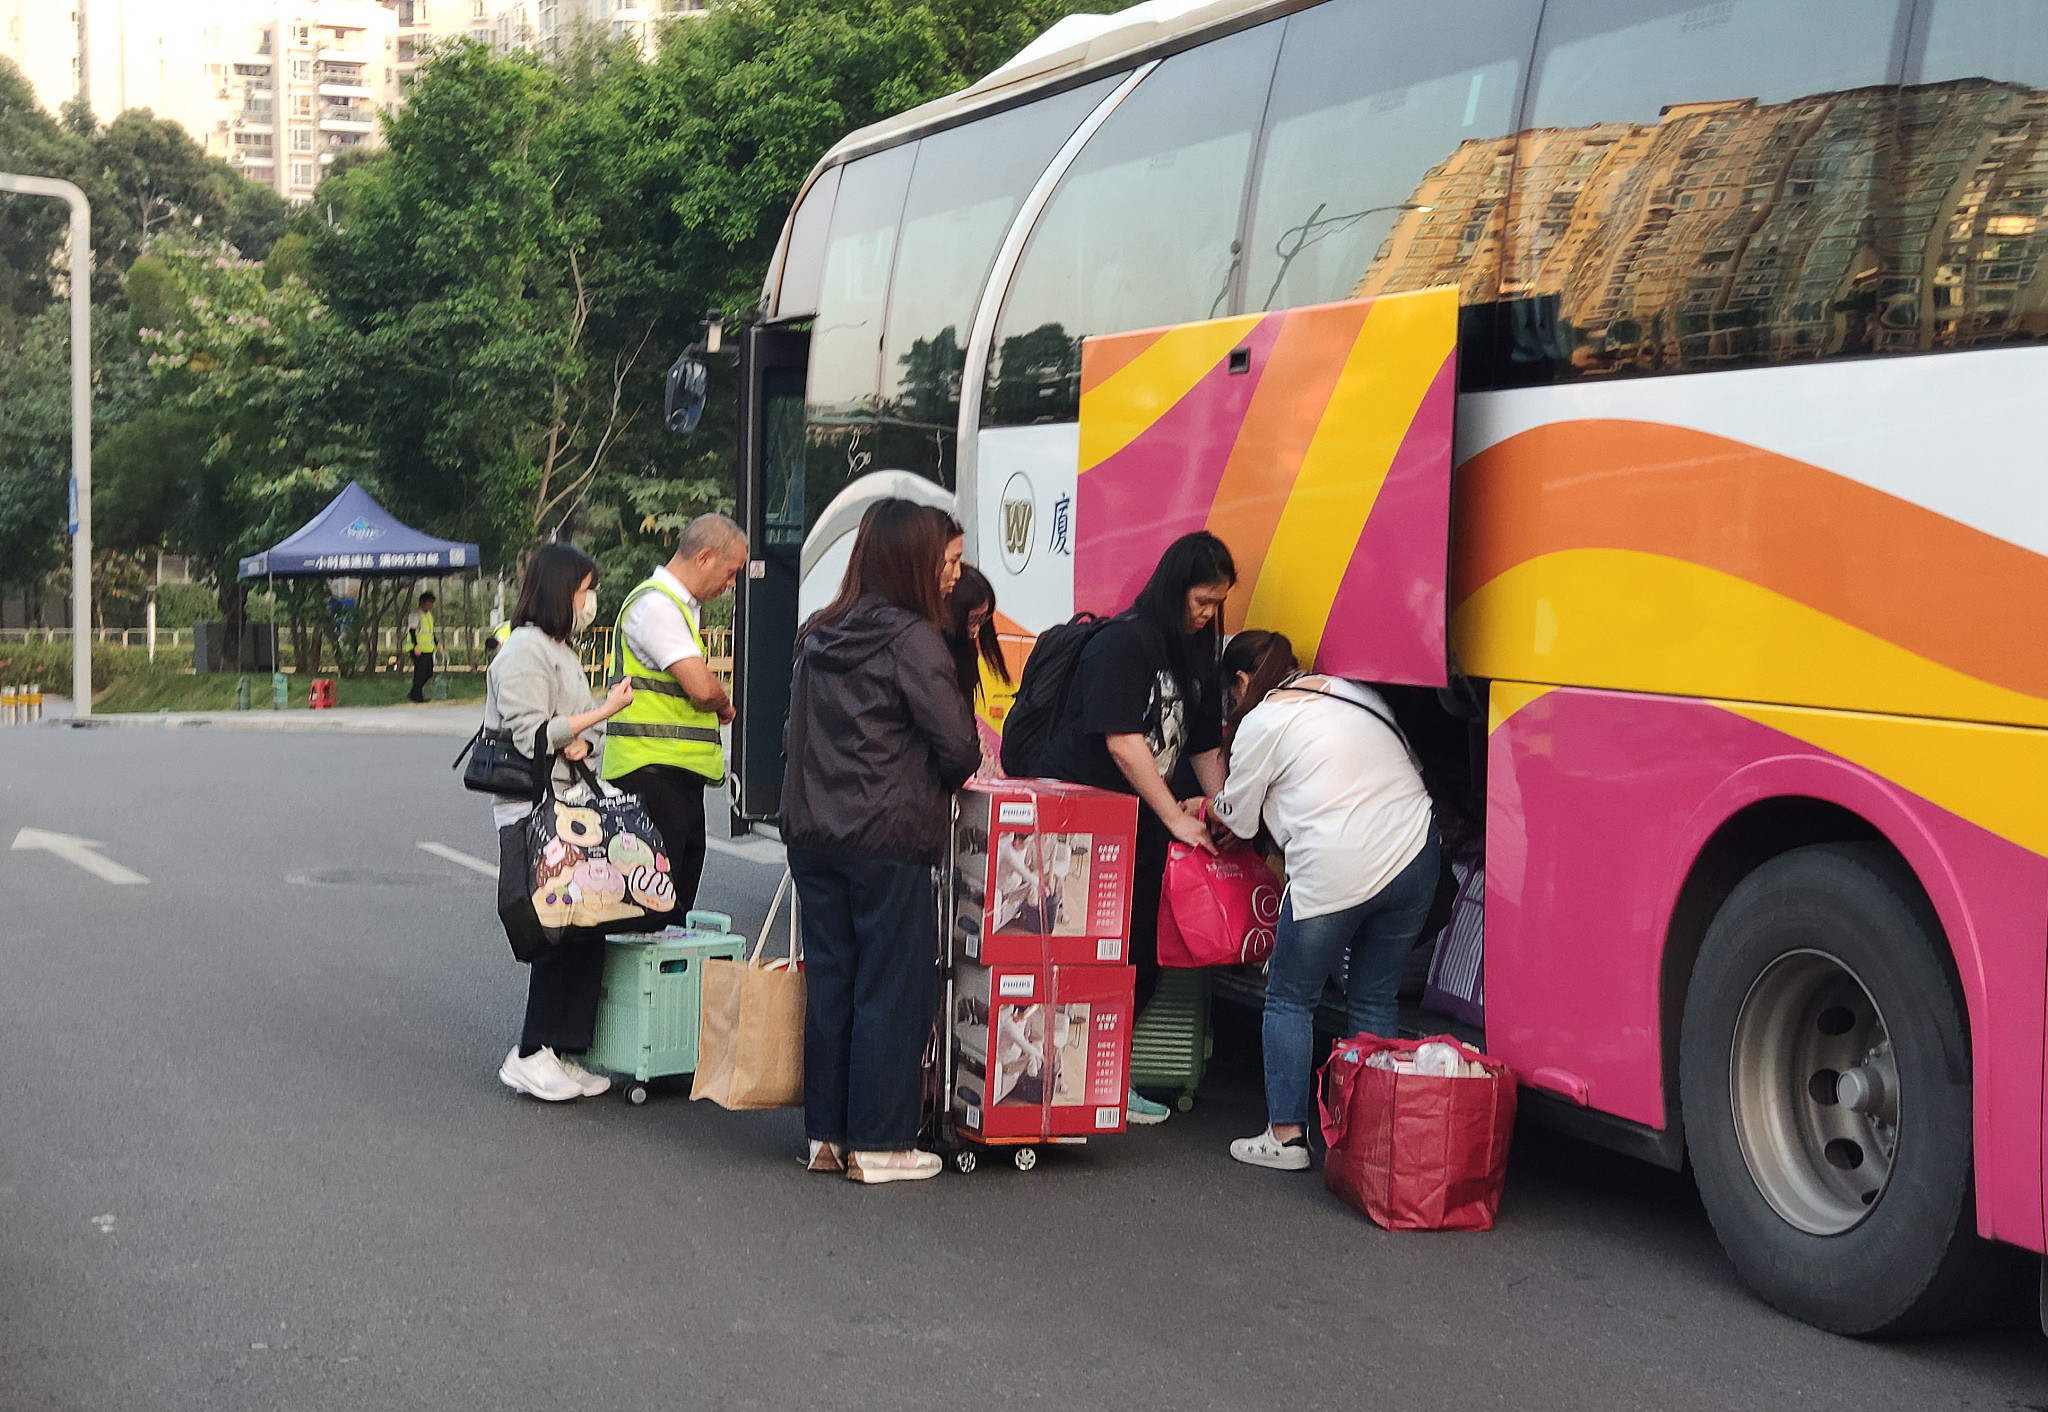 Hong Kong shoppers boarded the cross-border bus to Hong Kong, laden with purchases from a supermarket, ranging from bulky to compact items, Qianhai, a Shenzhen-Hong Kong pilot cooperation zone in the southern Chinese city of Shenzhen, November 27, 2023. /CFP